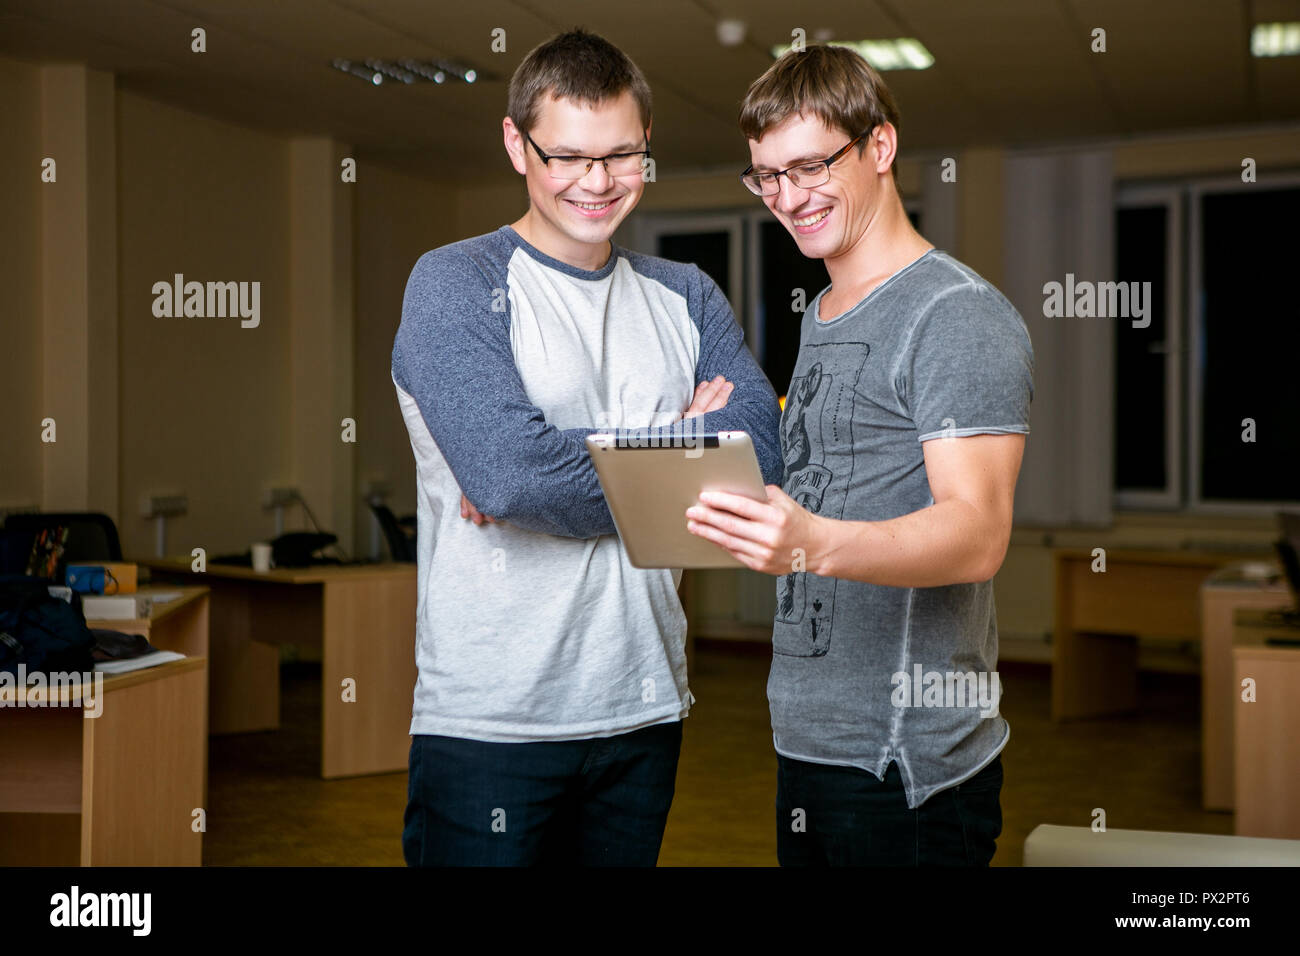 Two young people are discussing a project in the office. Standing next to each other, one of them tells the other about his project and shows on the tablet, they smile Stock Photo